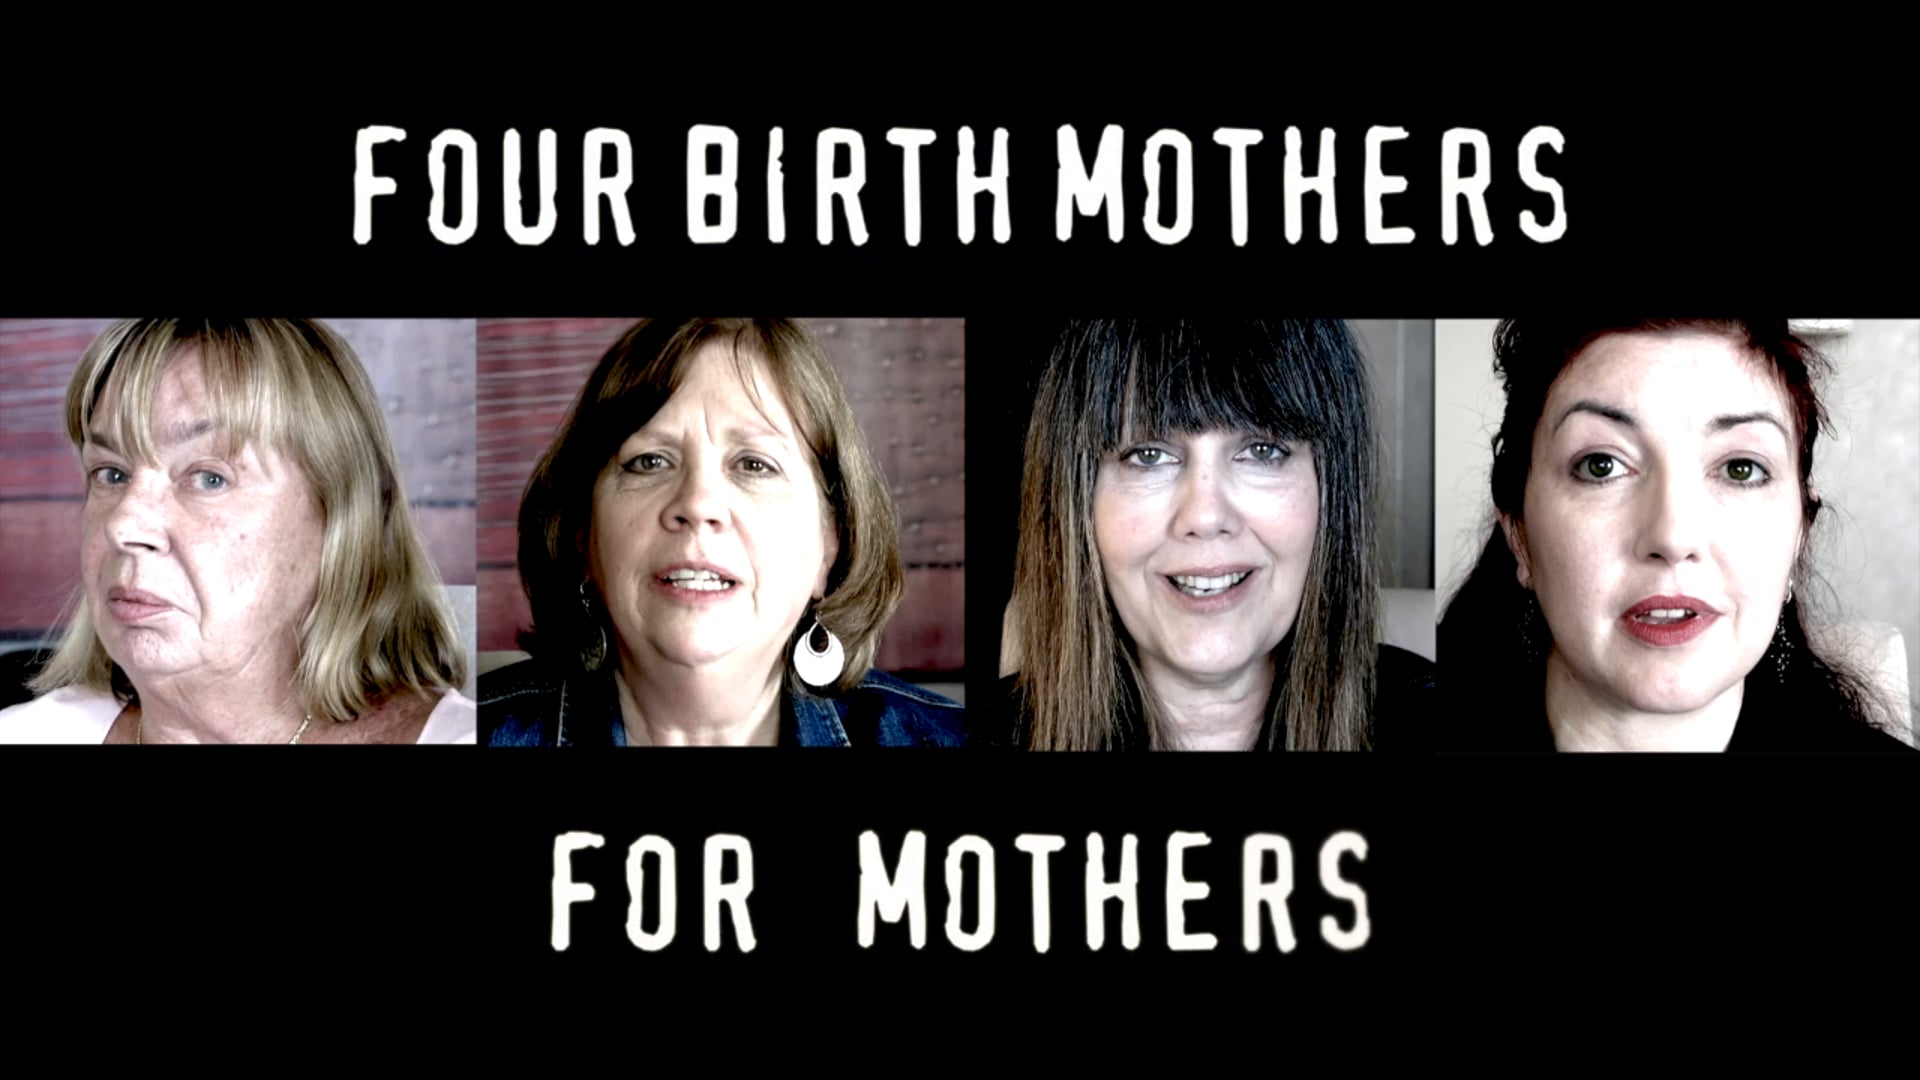 Short Film: Four Birthmothers - For Mothers